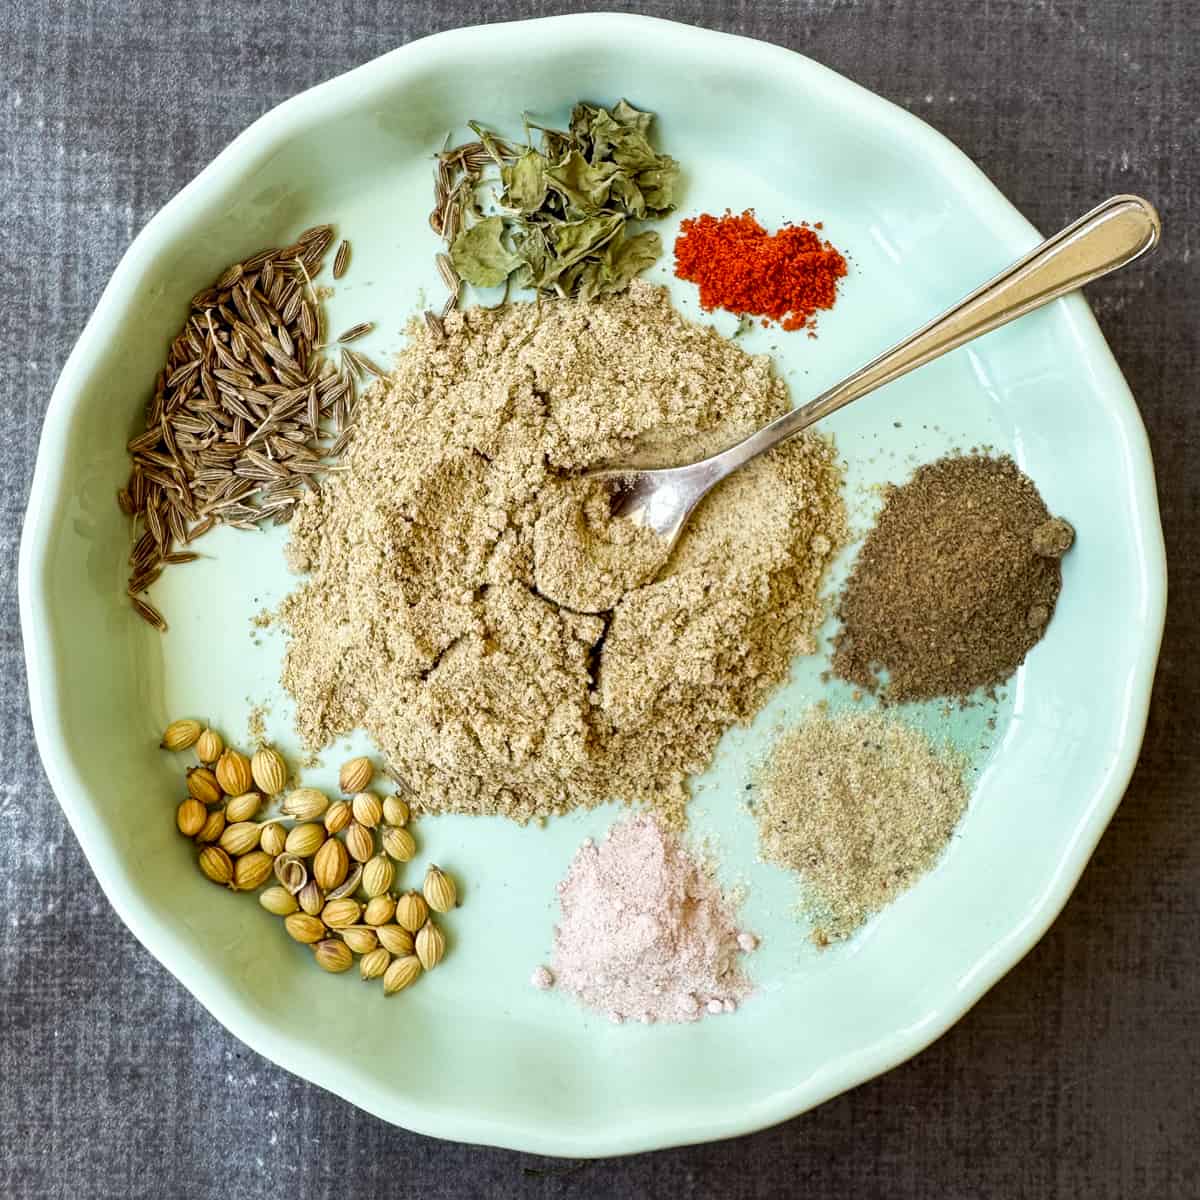 Chaat masala in the middle surrounded by the spices in chaat masala like black salt (kala namak), coriander, cumin, dried mint leaves, chili powder, amchur powder (dried mango powder), asafetida.